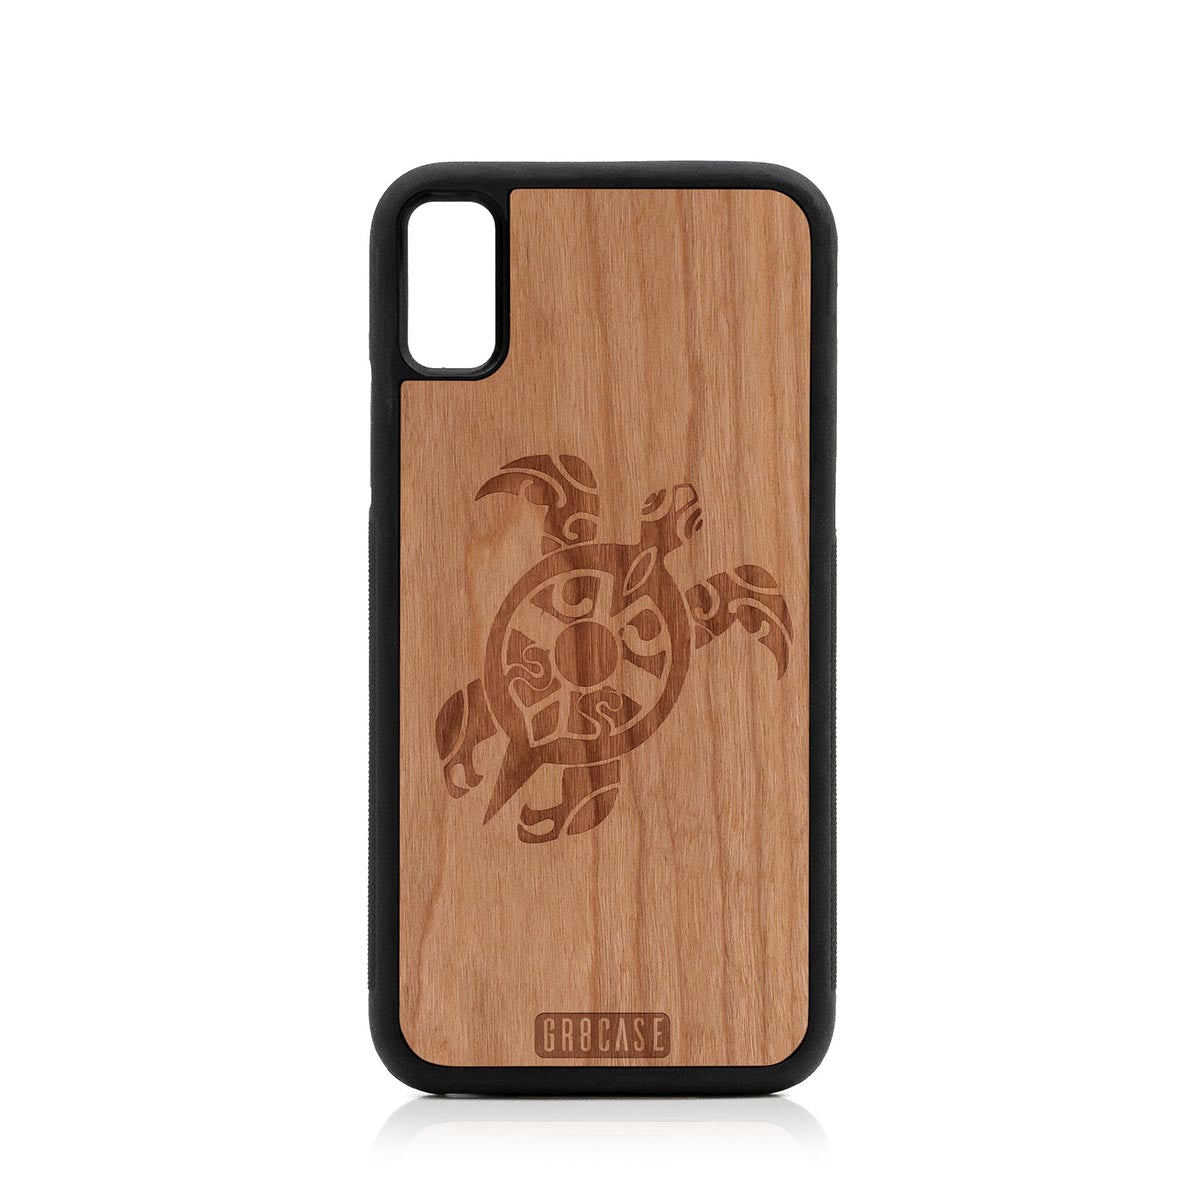 Turtle Design Wood Case For iPhone XS Max